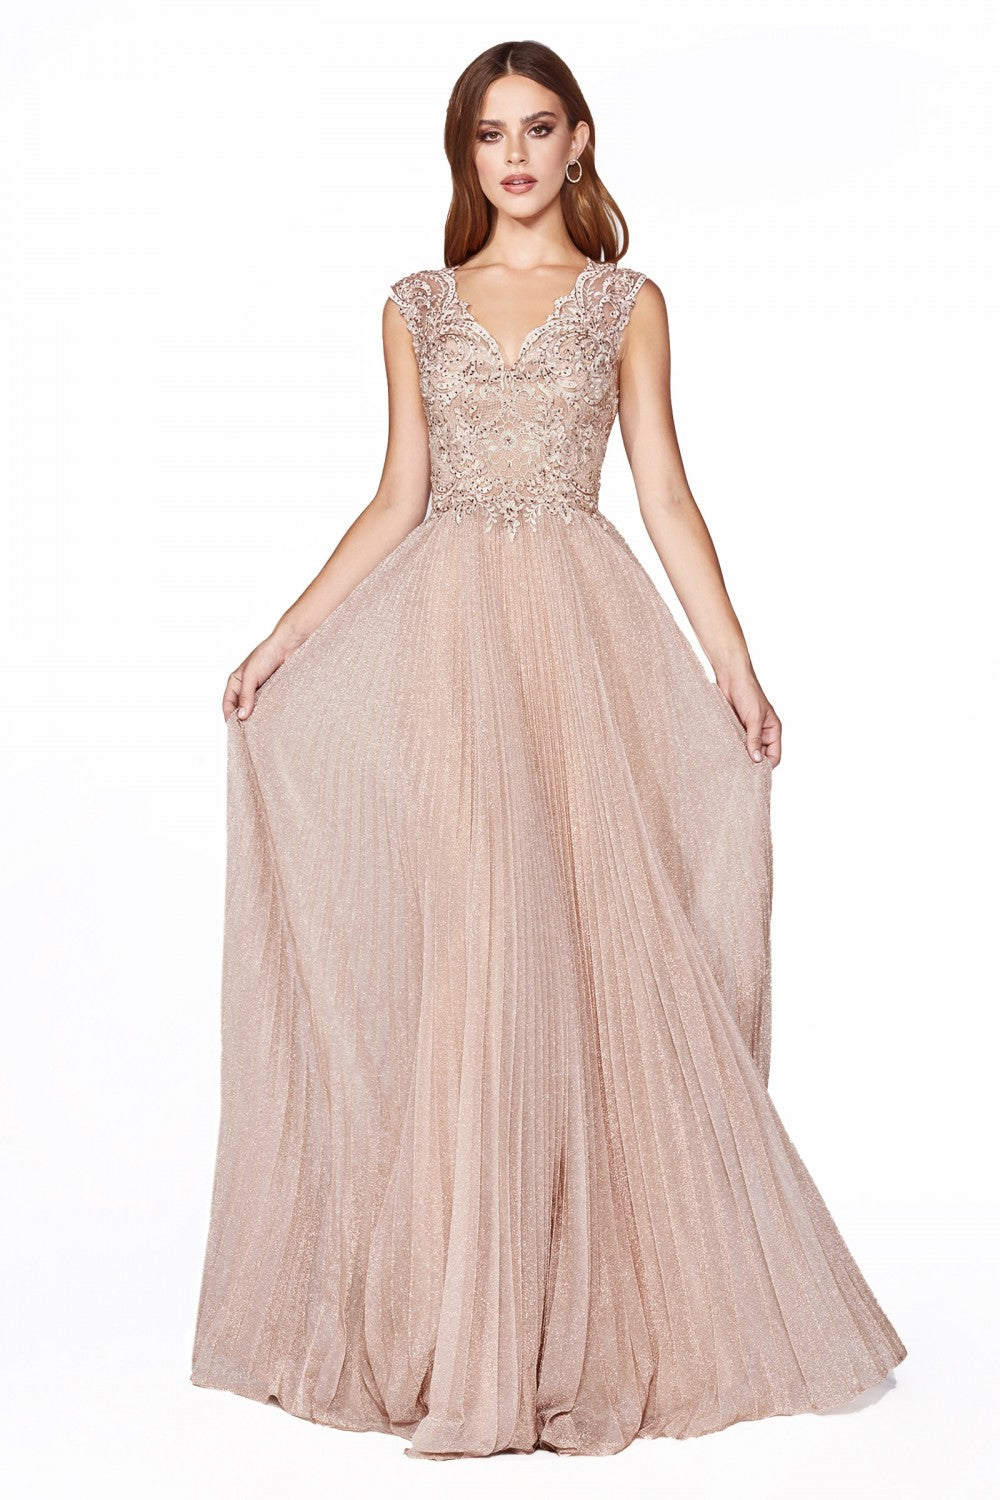 A-line Metallic Pleated Bridesmaid & Mother of Bride Dress Modest Cap Sleeve Bodice Scalloped neckline Elegant A-line Gown CDHT011 Elsy Style Mother of the Bride Dress